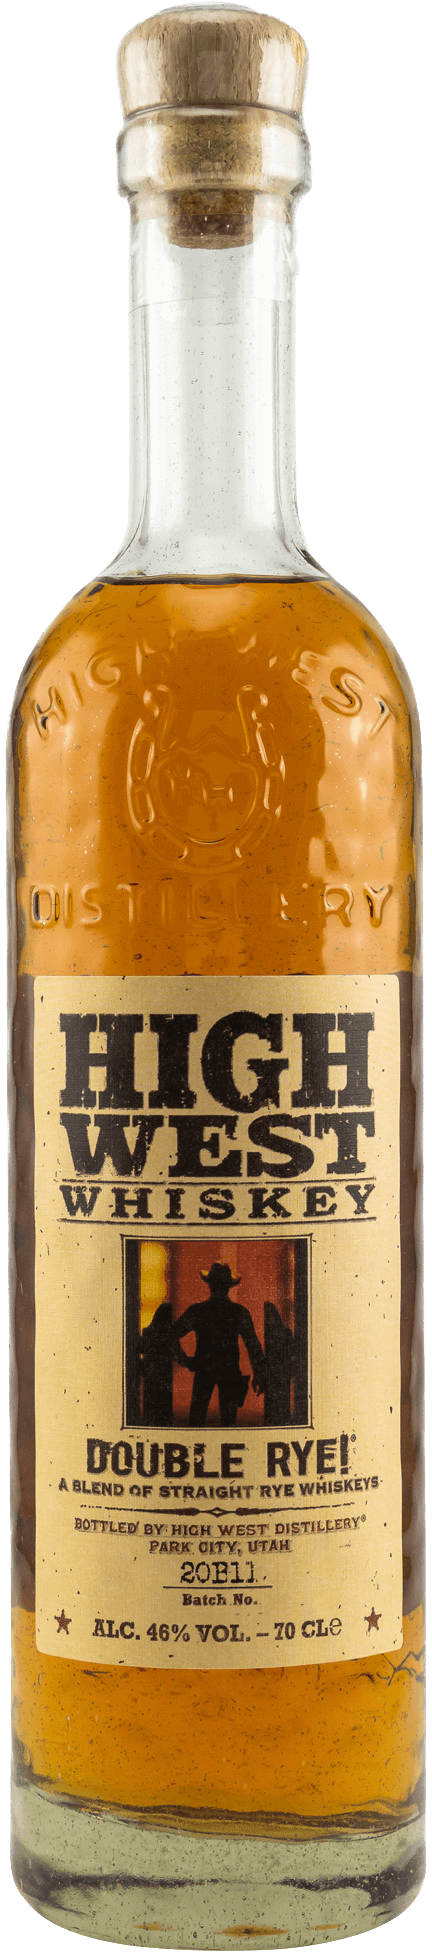 High West American Double Rye Whiskey 46%